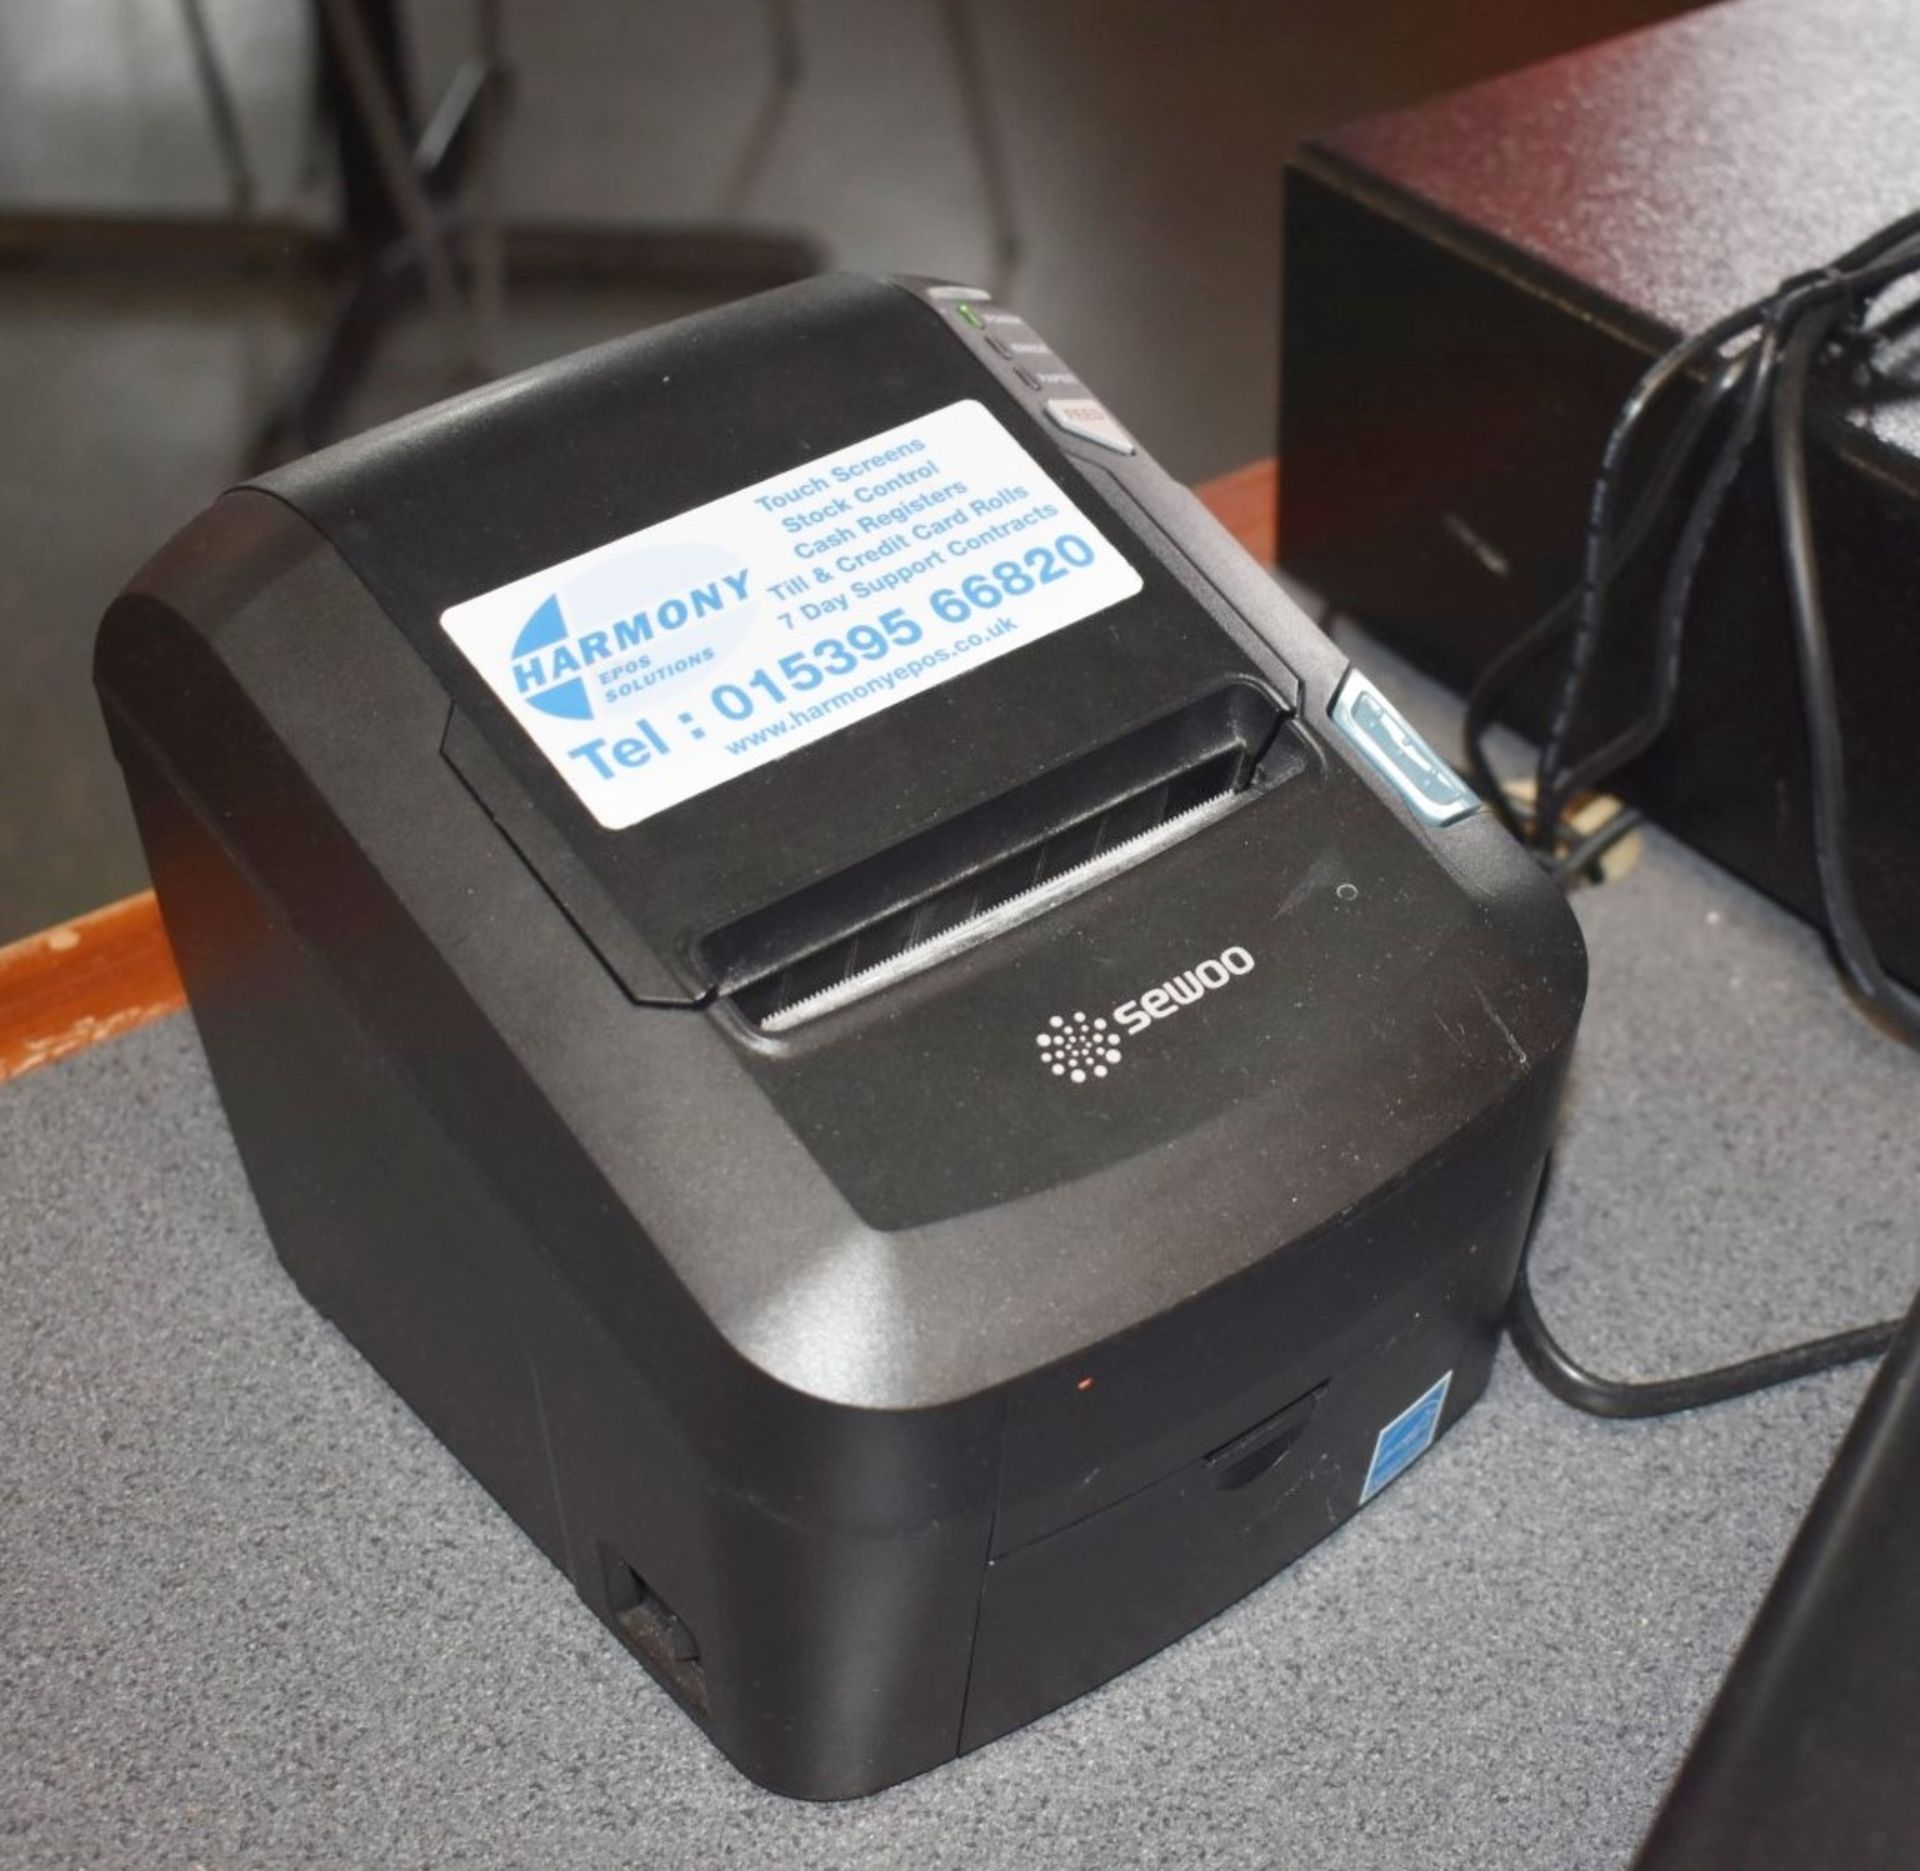 1 x Sewoo High Speed USB Receipt Printer For Epos Systems - Model SLK-TL322 II - Includes Cables